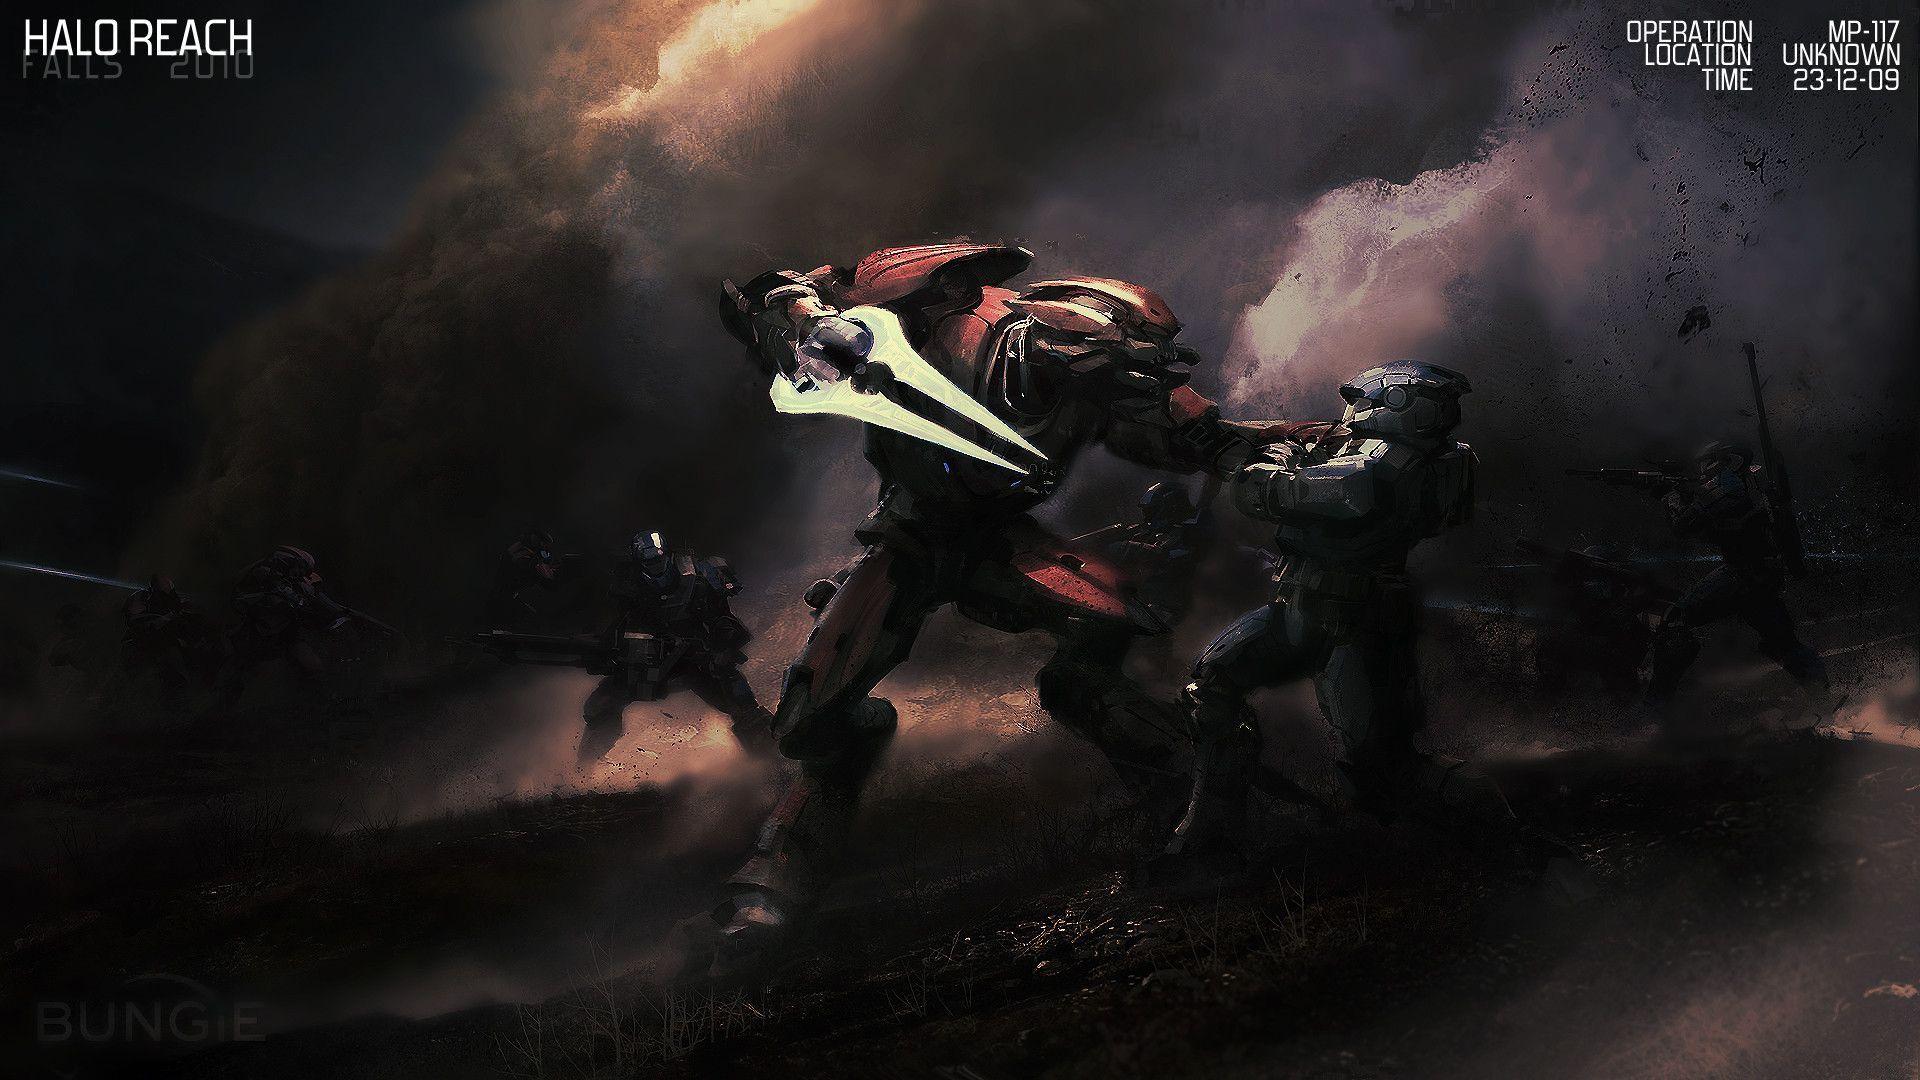 Halo Reach Background HD Sick Awesome Halo Reach Wallpaper, New